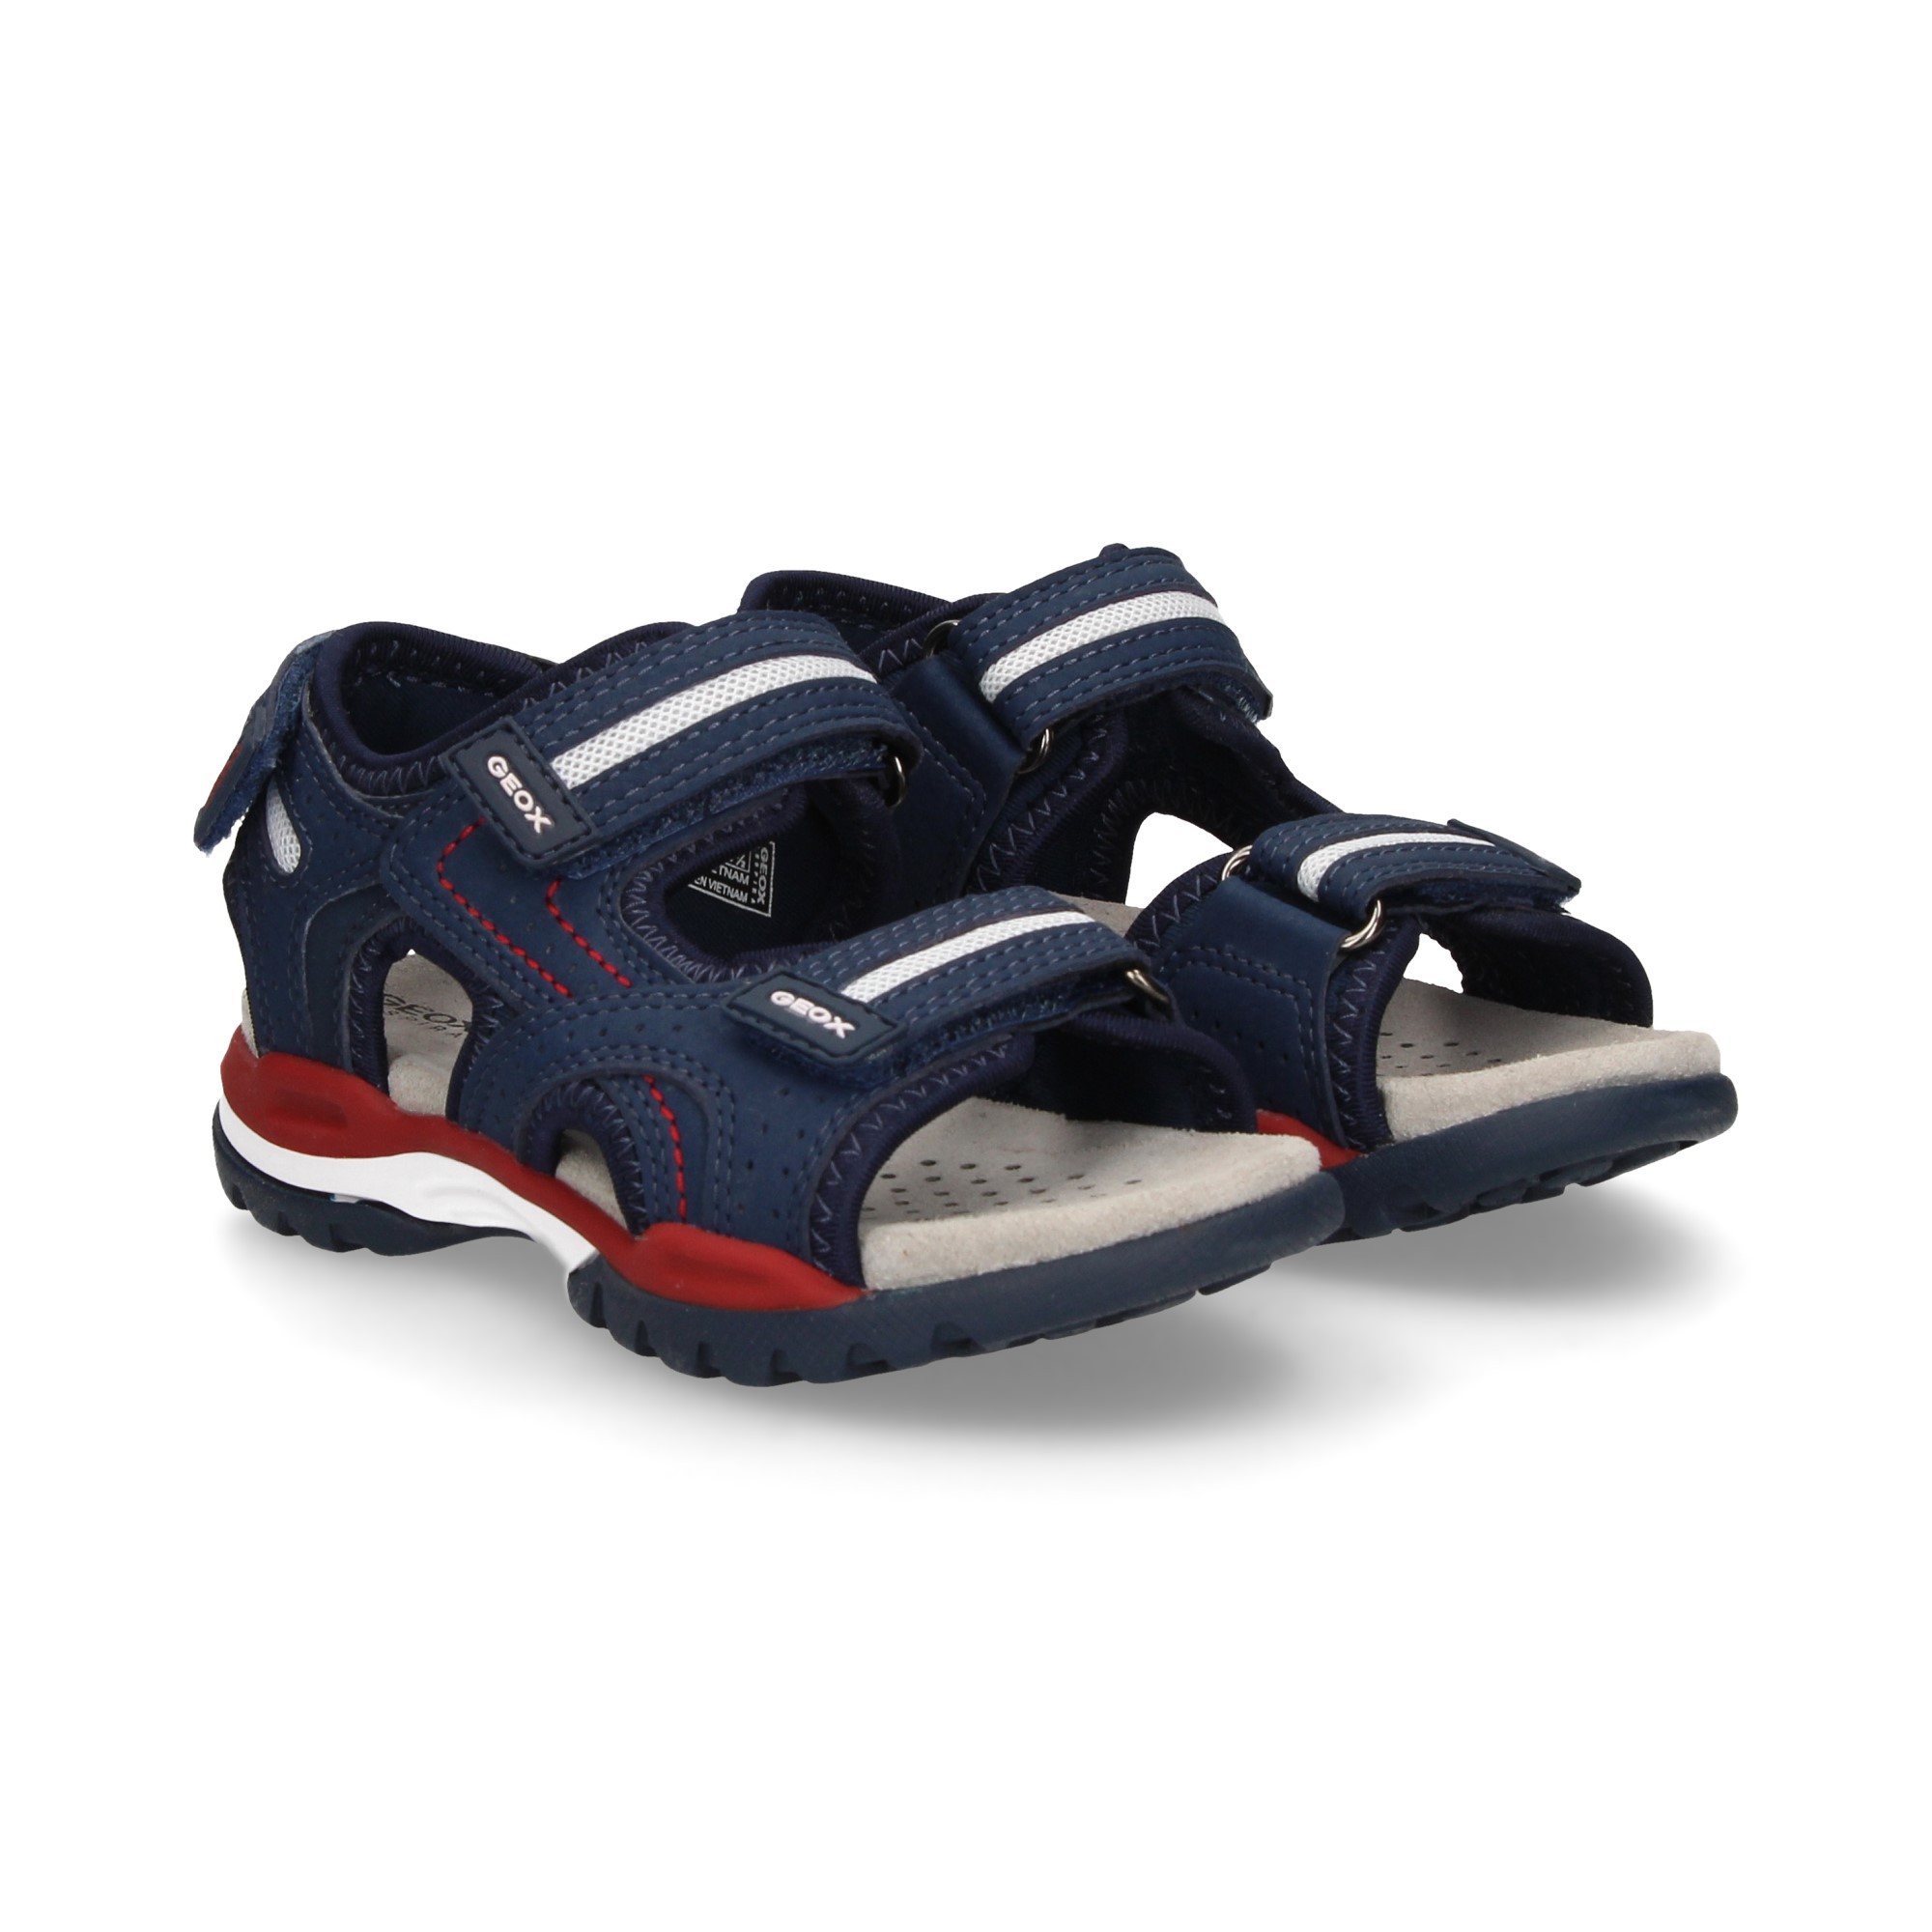 sandals and flip J920RD C0735 NAVY/RED